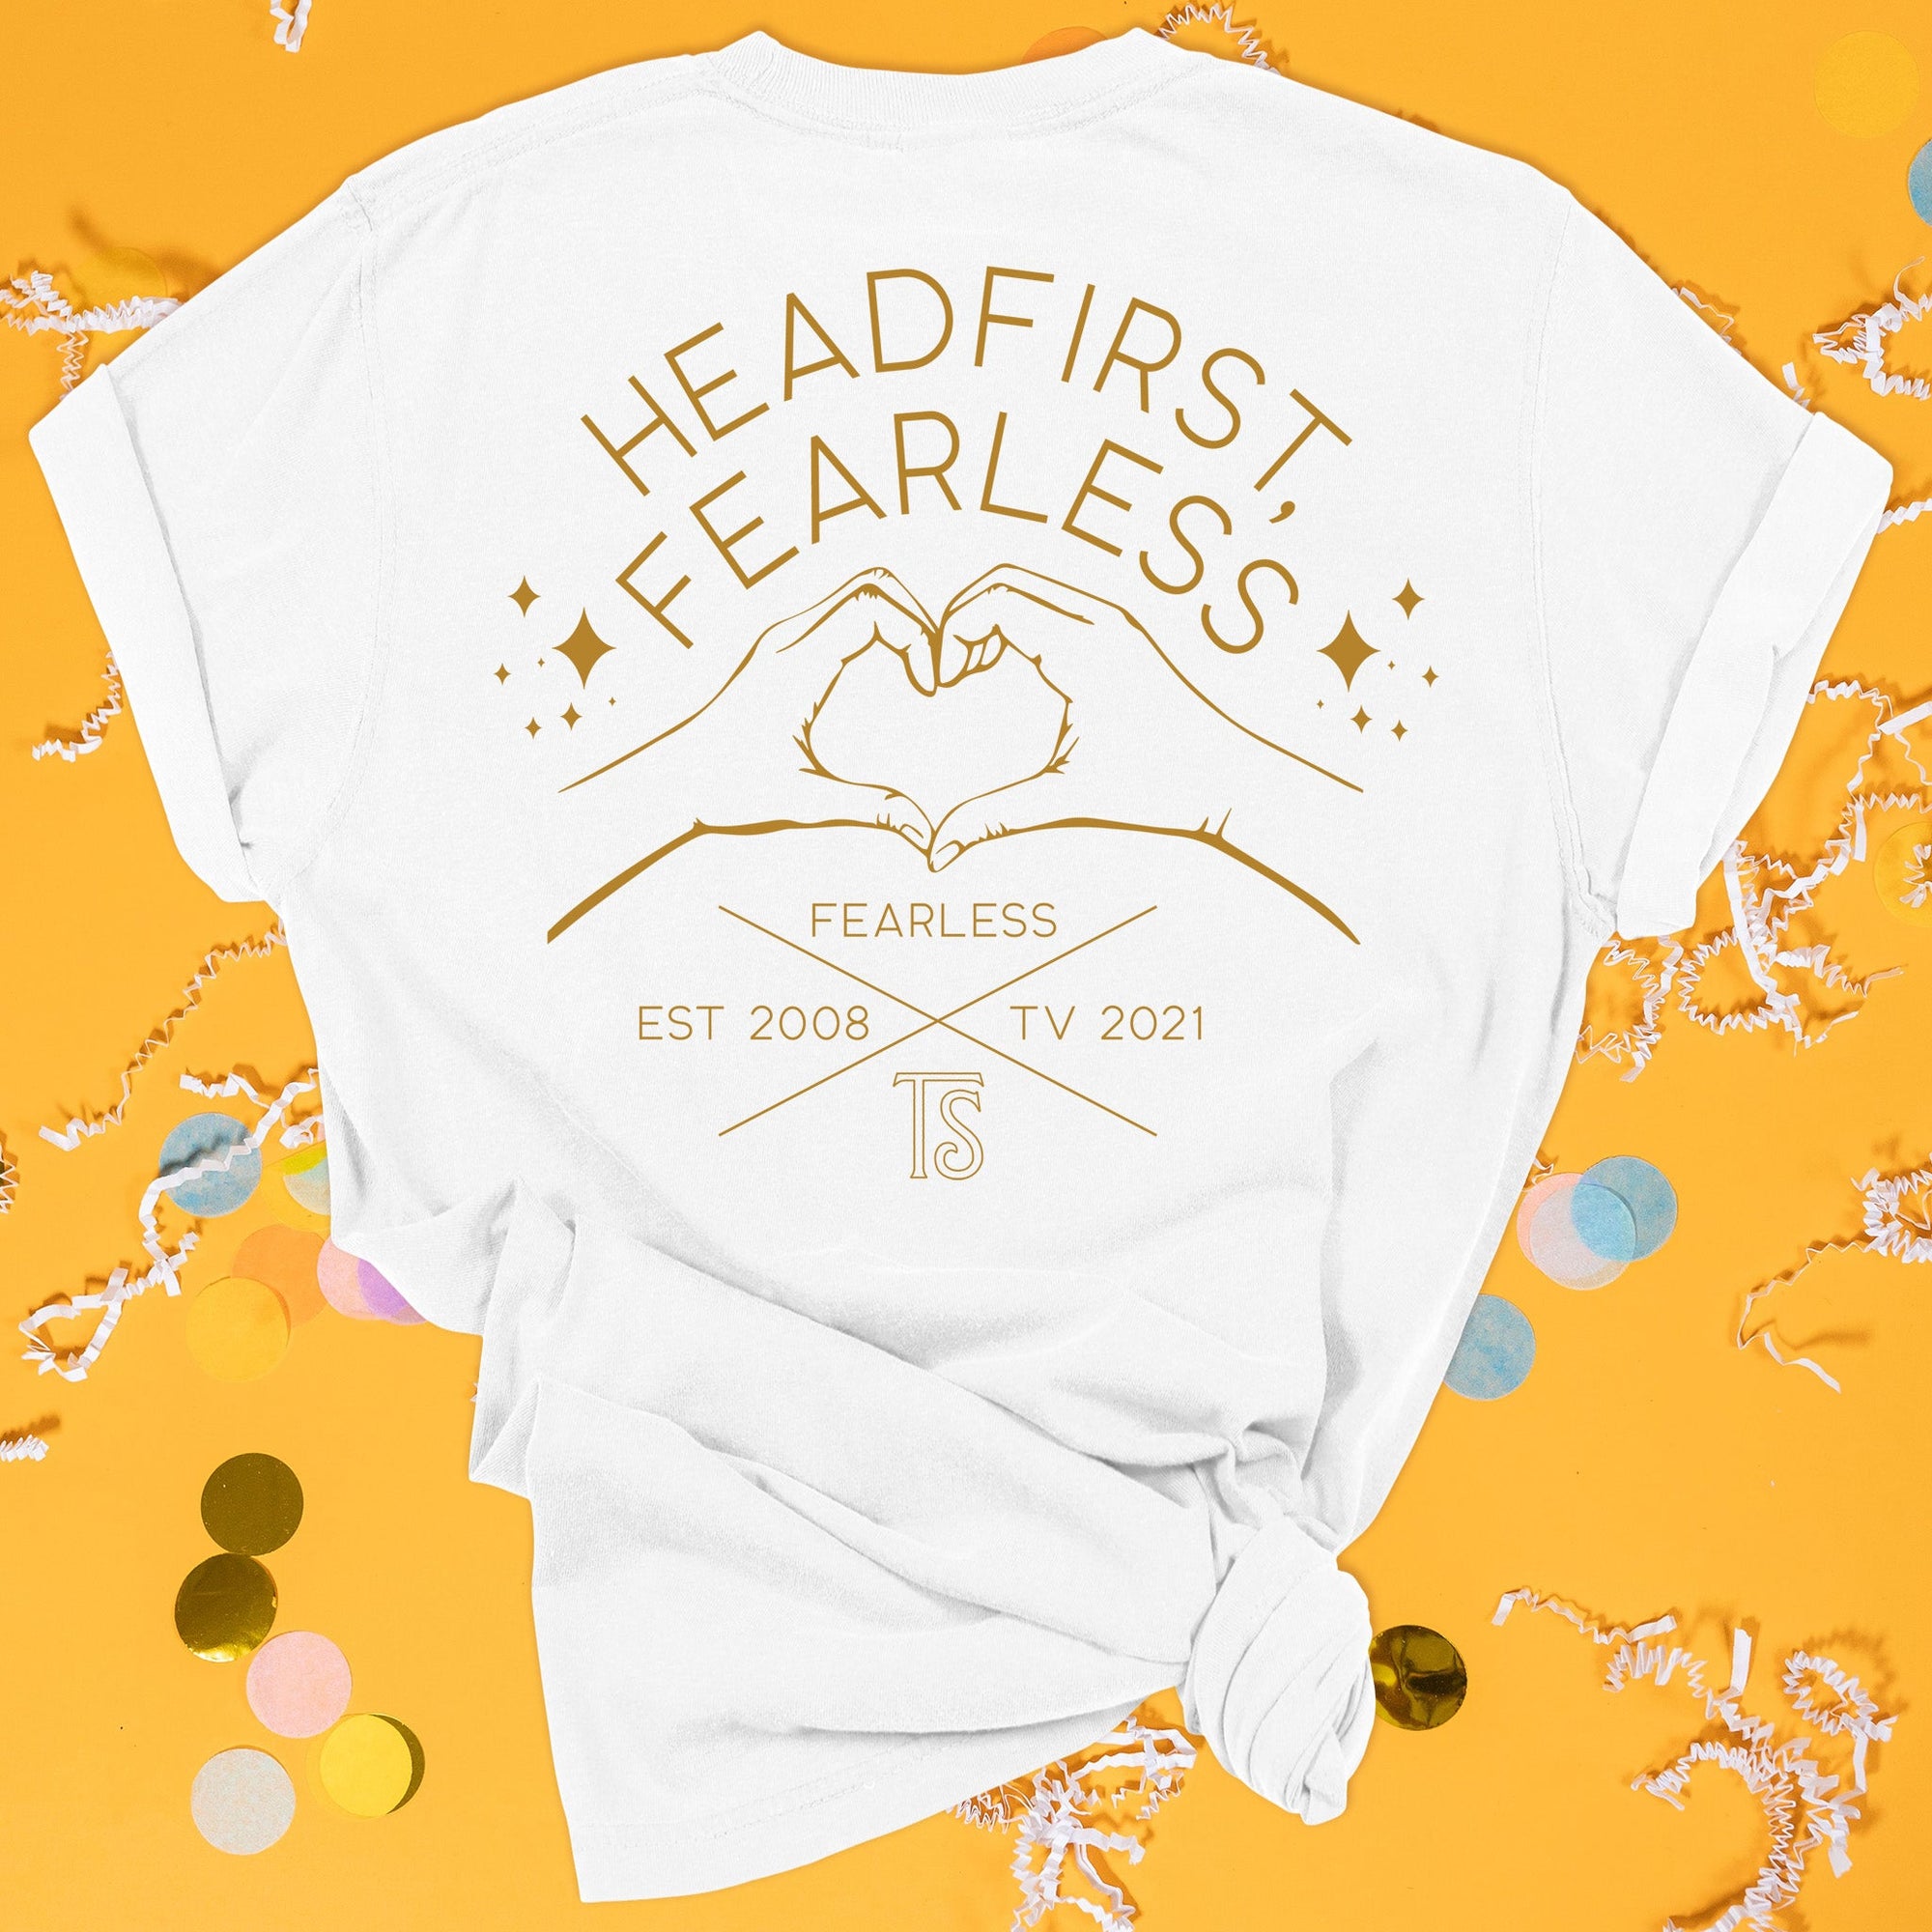 On a sunny mustard background sits the back of a t-shirt with white crinkle and big, colorful confetti scattered around. This Taylor Swift Inspired Reputation tee is white with gold lettering and illustration. There is a hands heart with sparkle stars and it says "HEADFIRST, FEARLESS" in all caps. It also says "FEARLESS, EST 2008, TV 2021, TS" in all caps. 